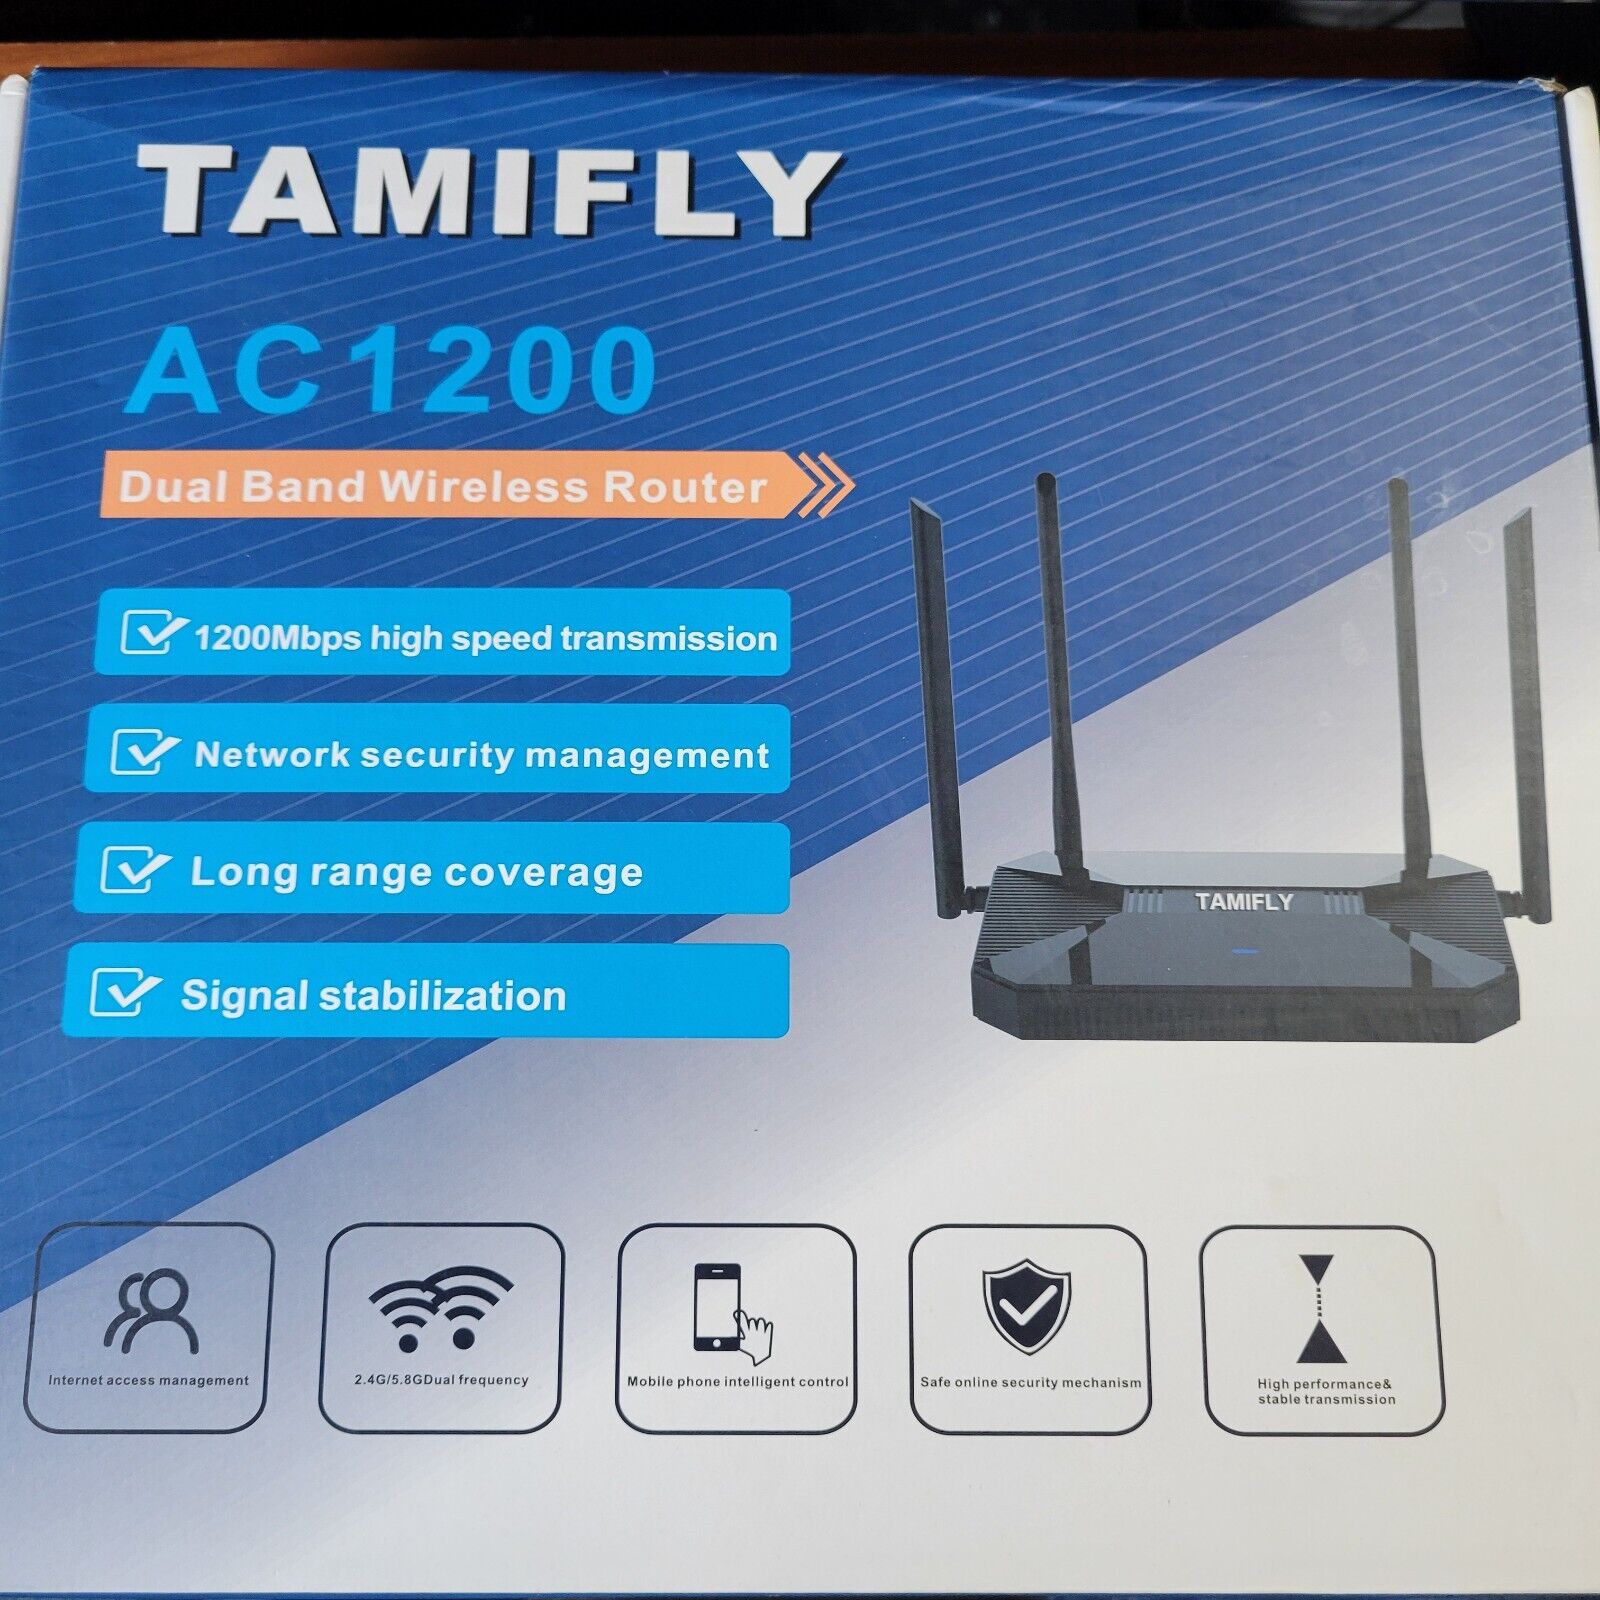 Tamifly AC 1200 Dual Band Wireless Router Network Security Management